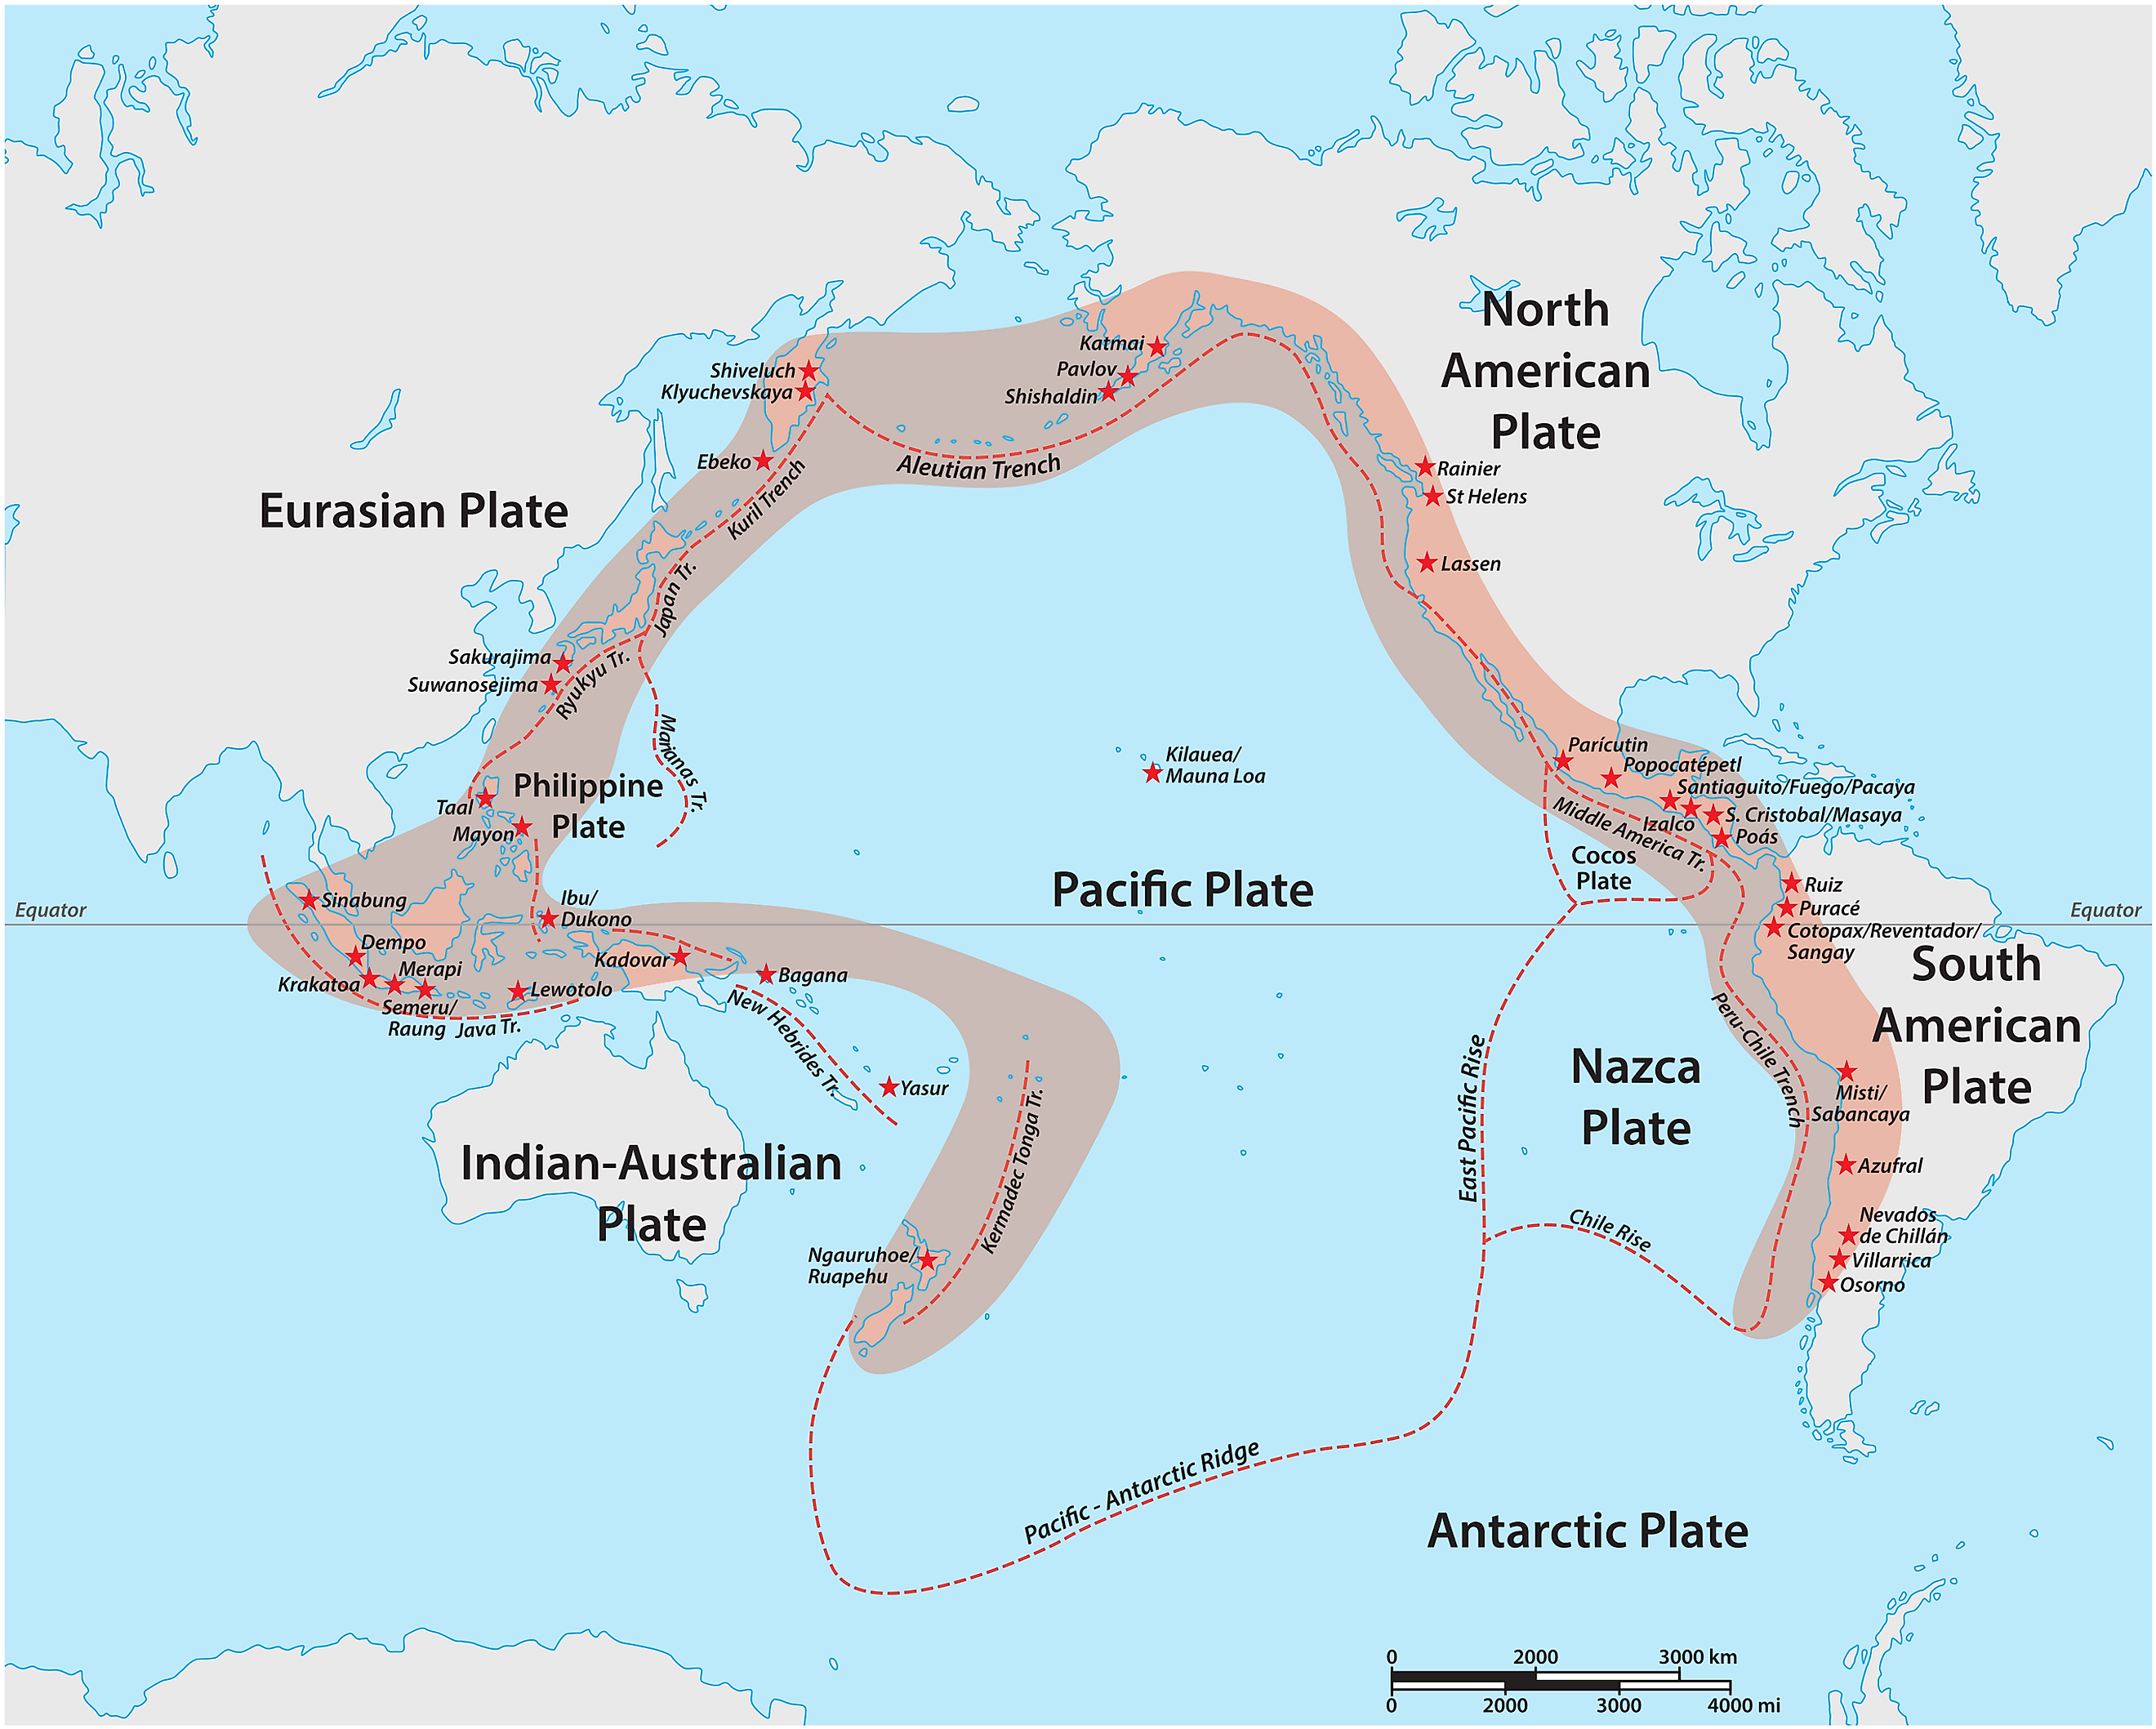 The Pacific Plate's subduction will bring America and Asia together.